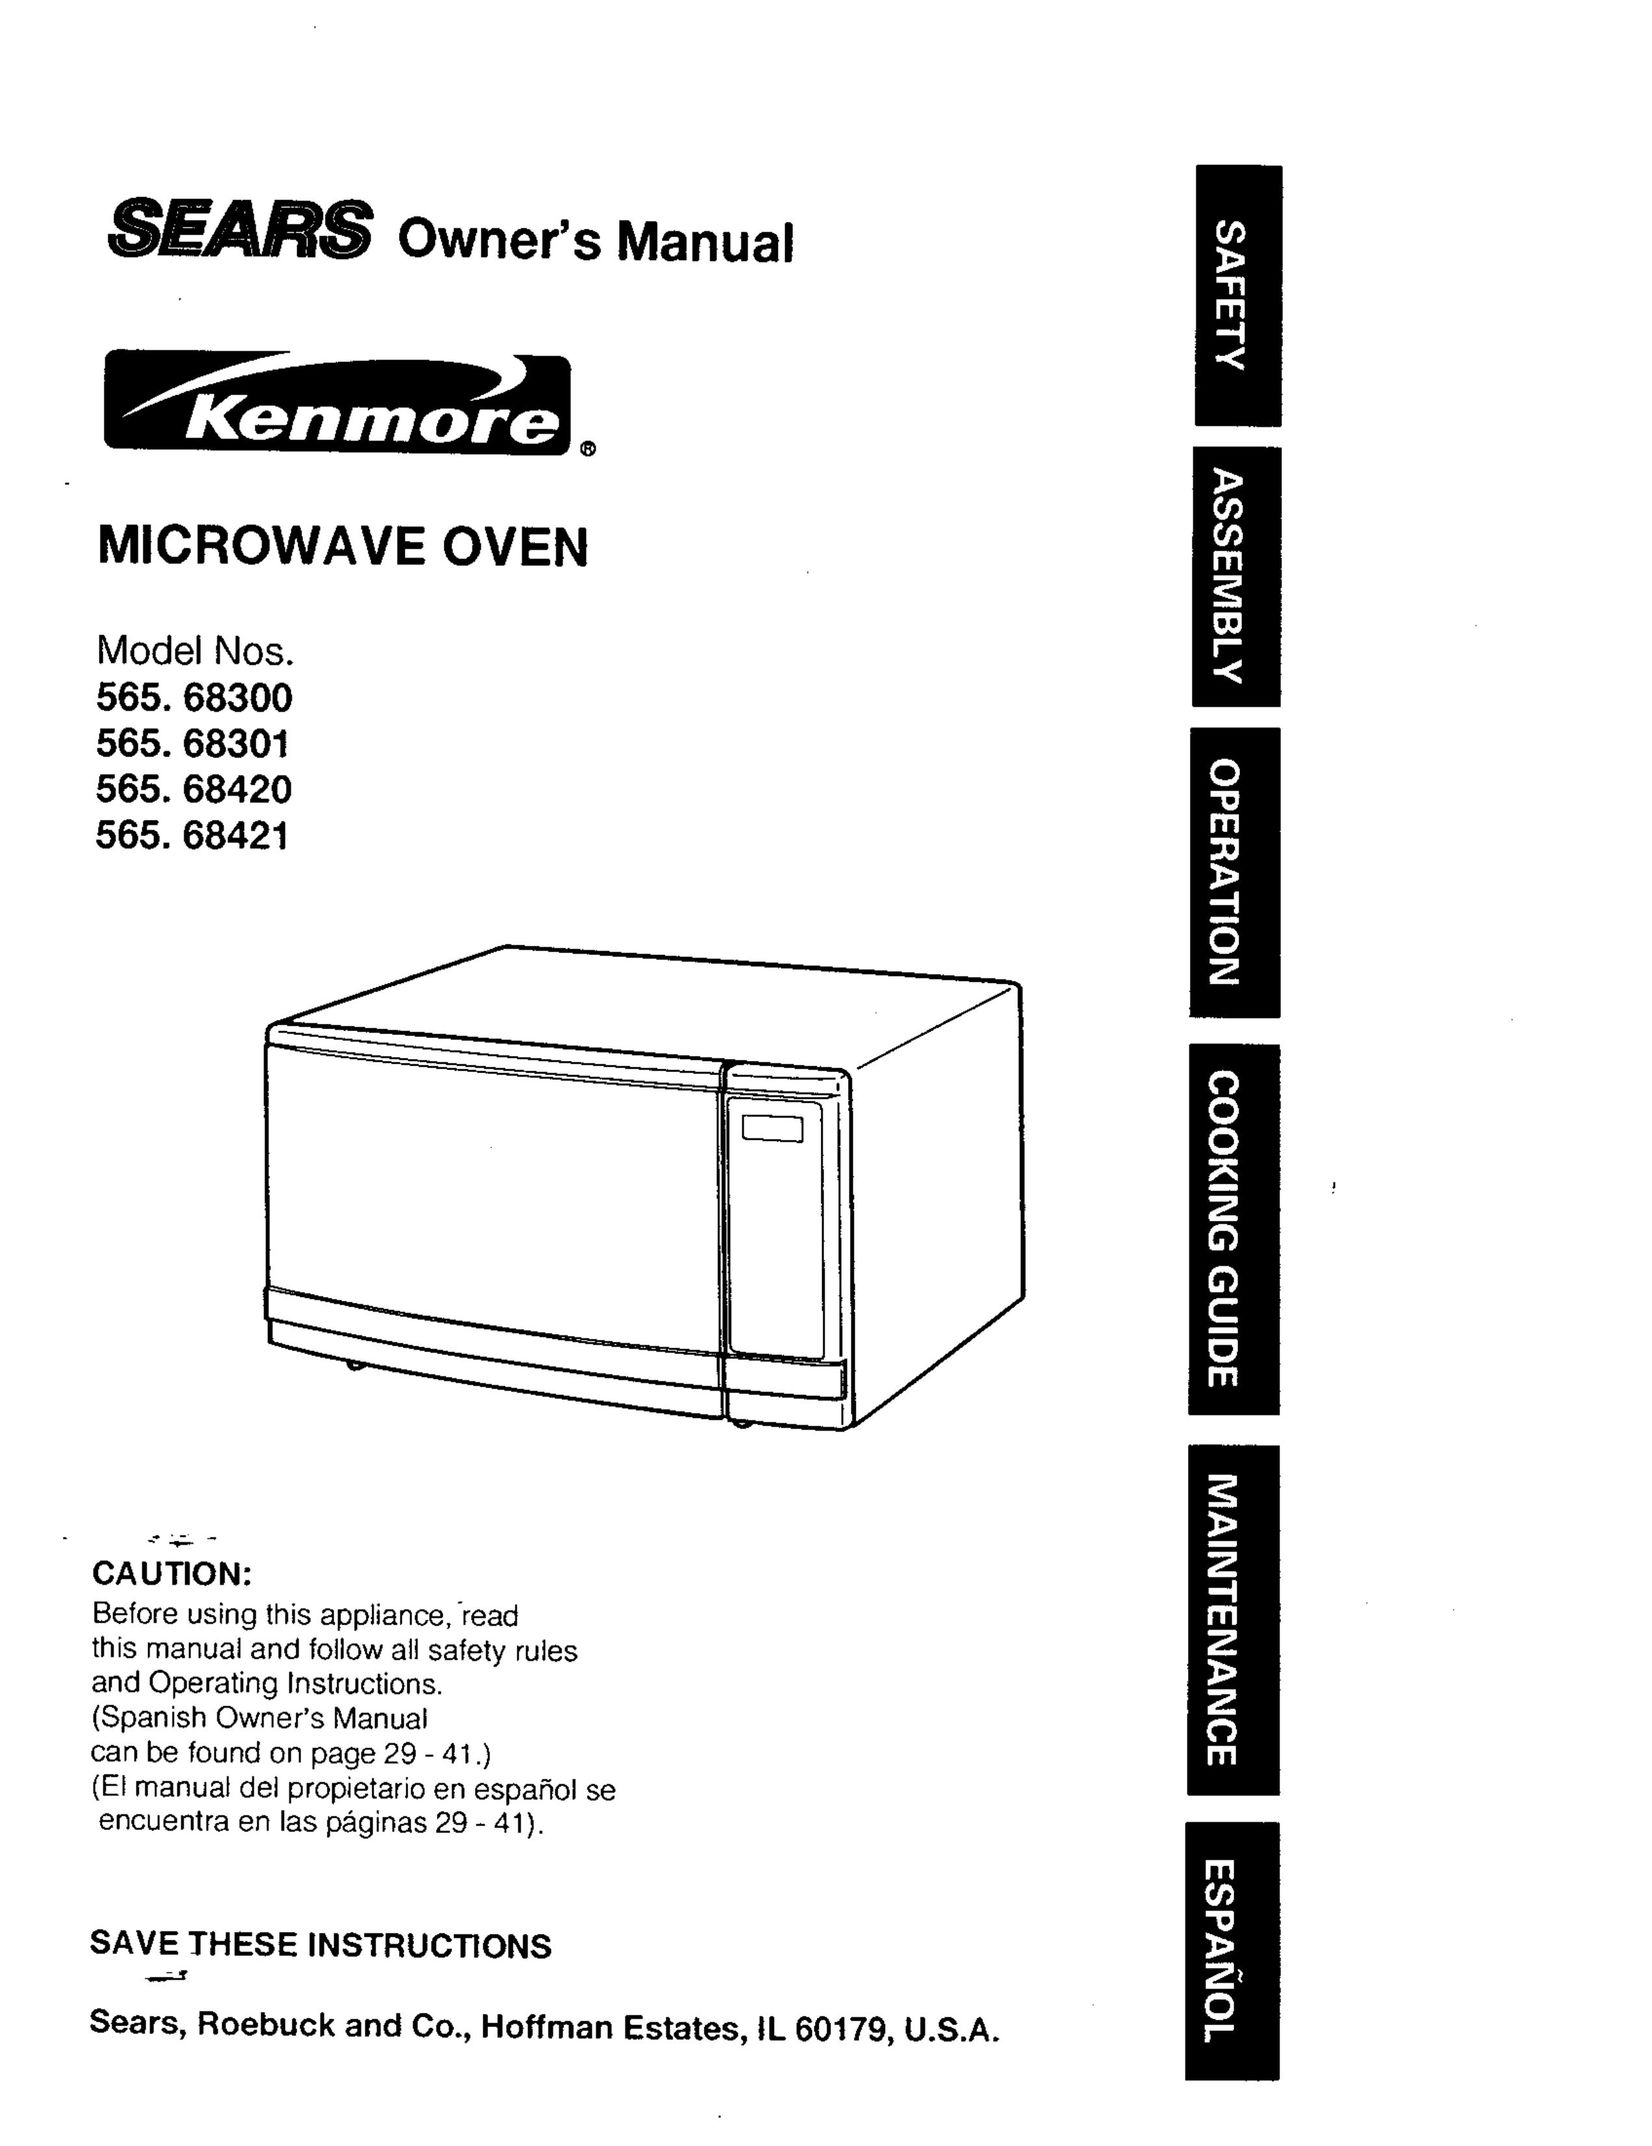 Kenmore 565.68421 Microwave Oven User Manual